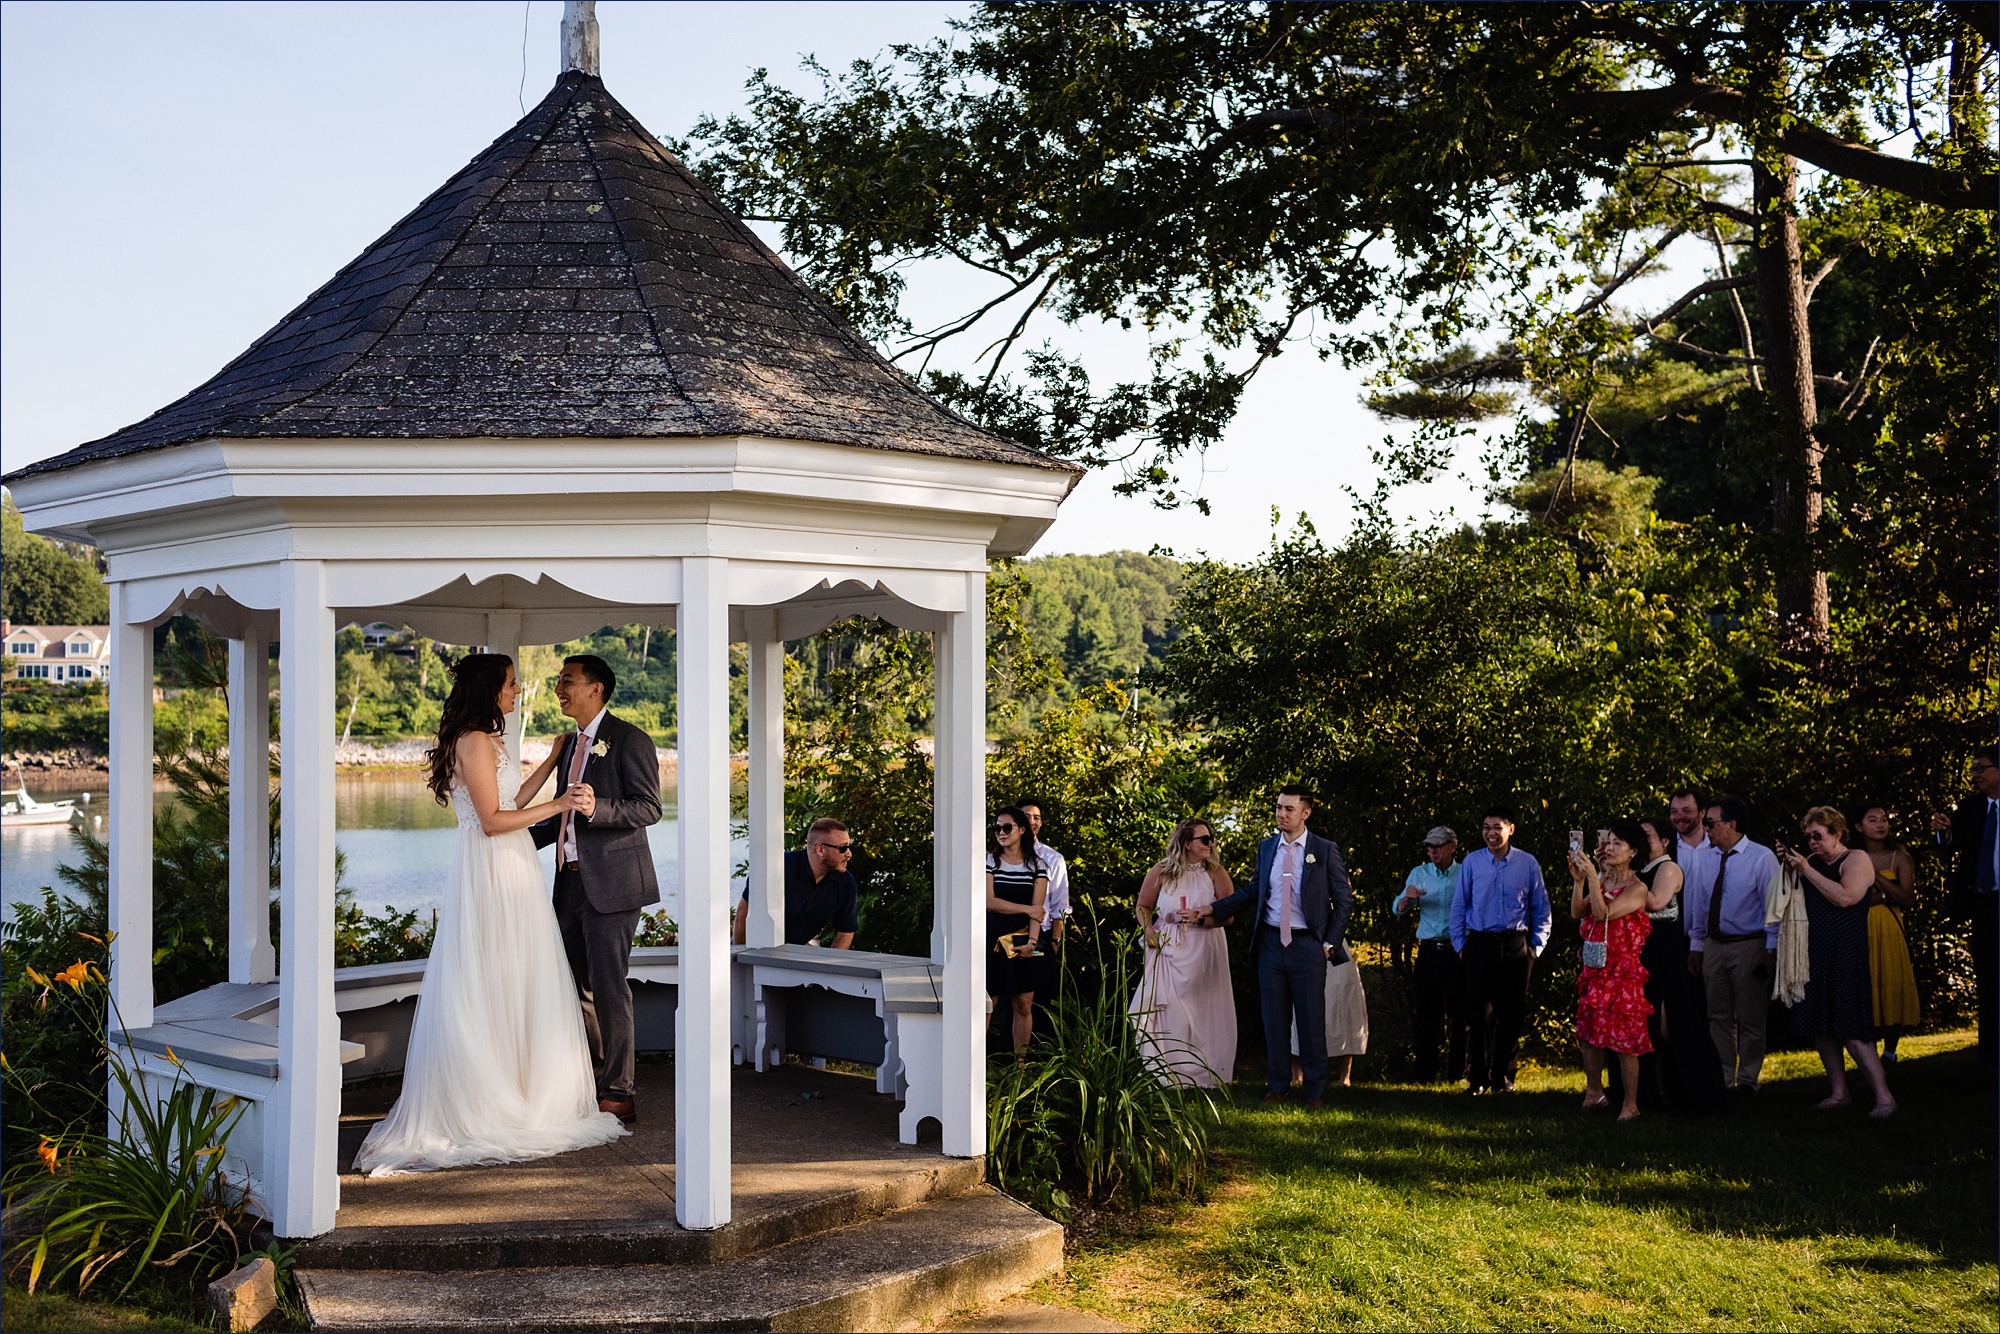 The bride and groom dance in the gazebo at York Dockside Guest Quarters with family cheering them on